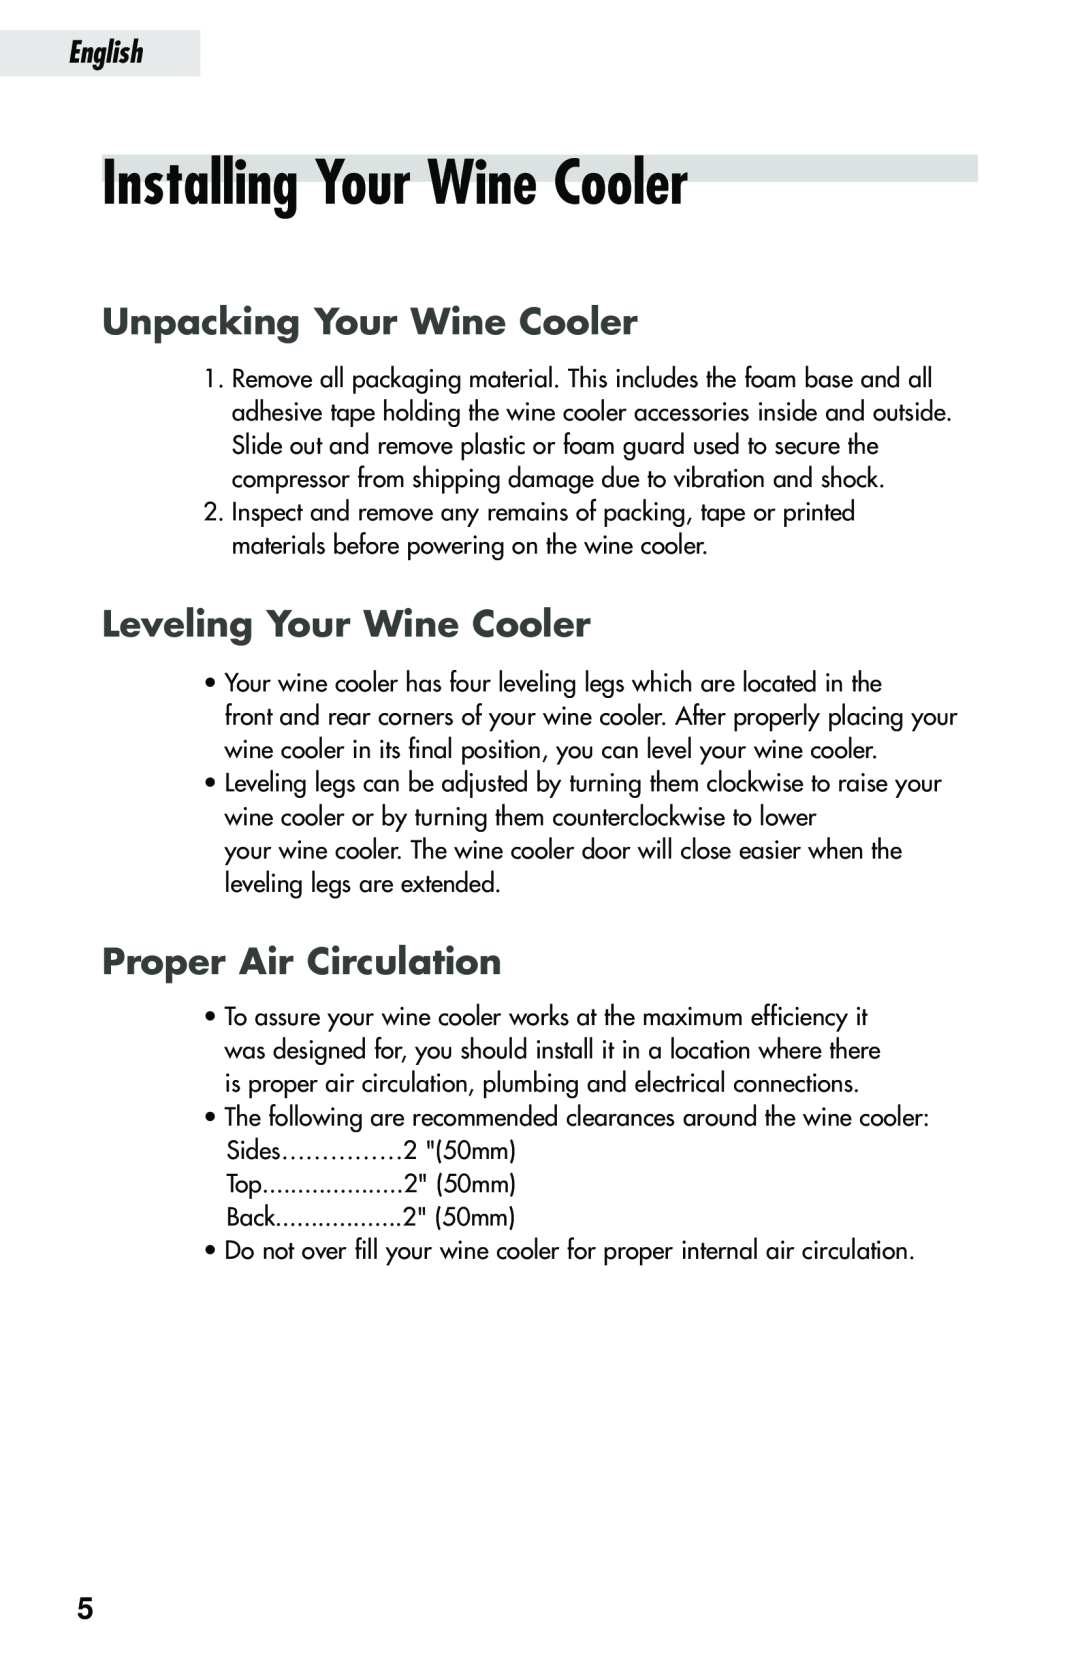 Haier JC-82GB Installing Your Wine Cooler, Unpacking Your Wine Cooler, Leveling Your Wine Cooler, Proper Air Circulation 